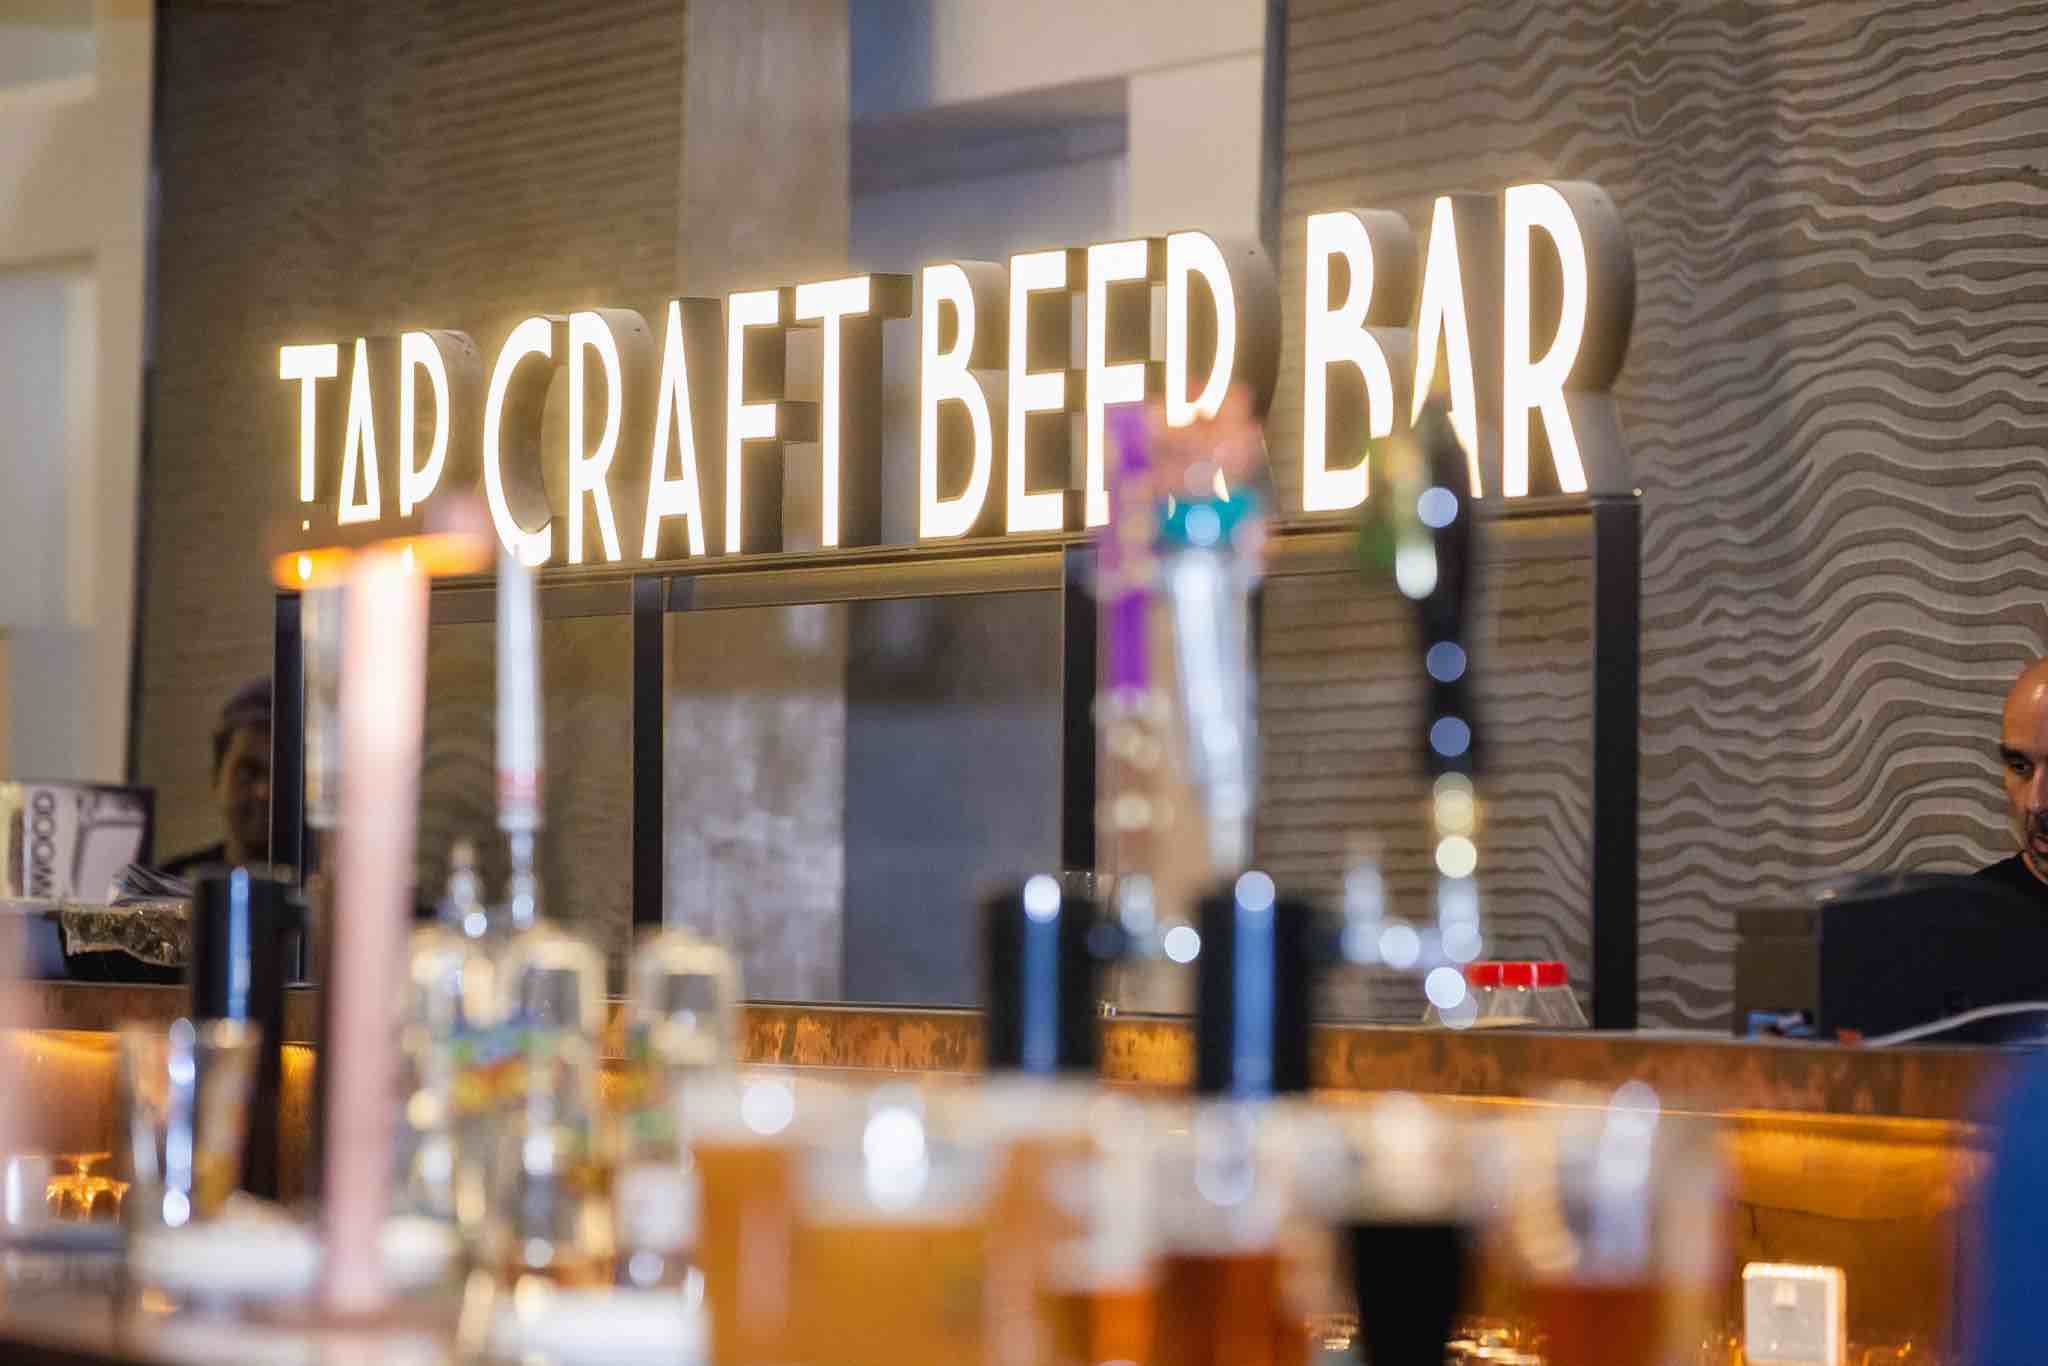 17 of the best craft beer bars in Singapore